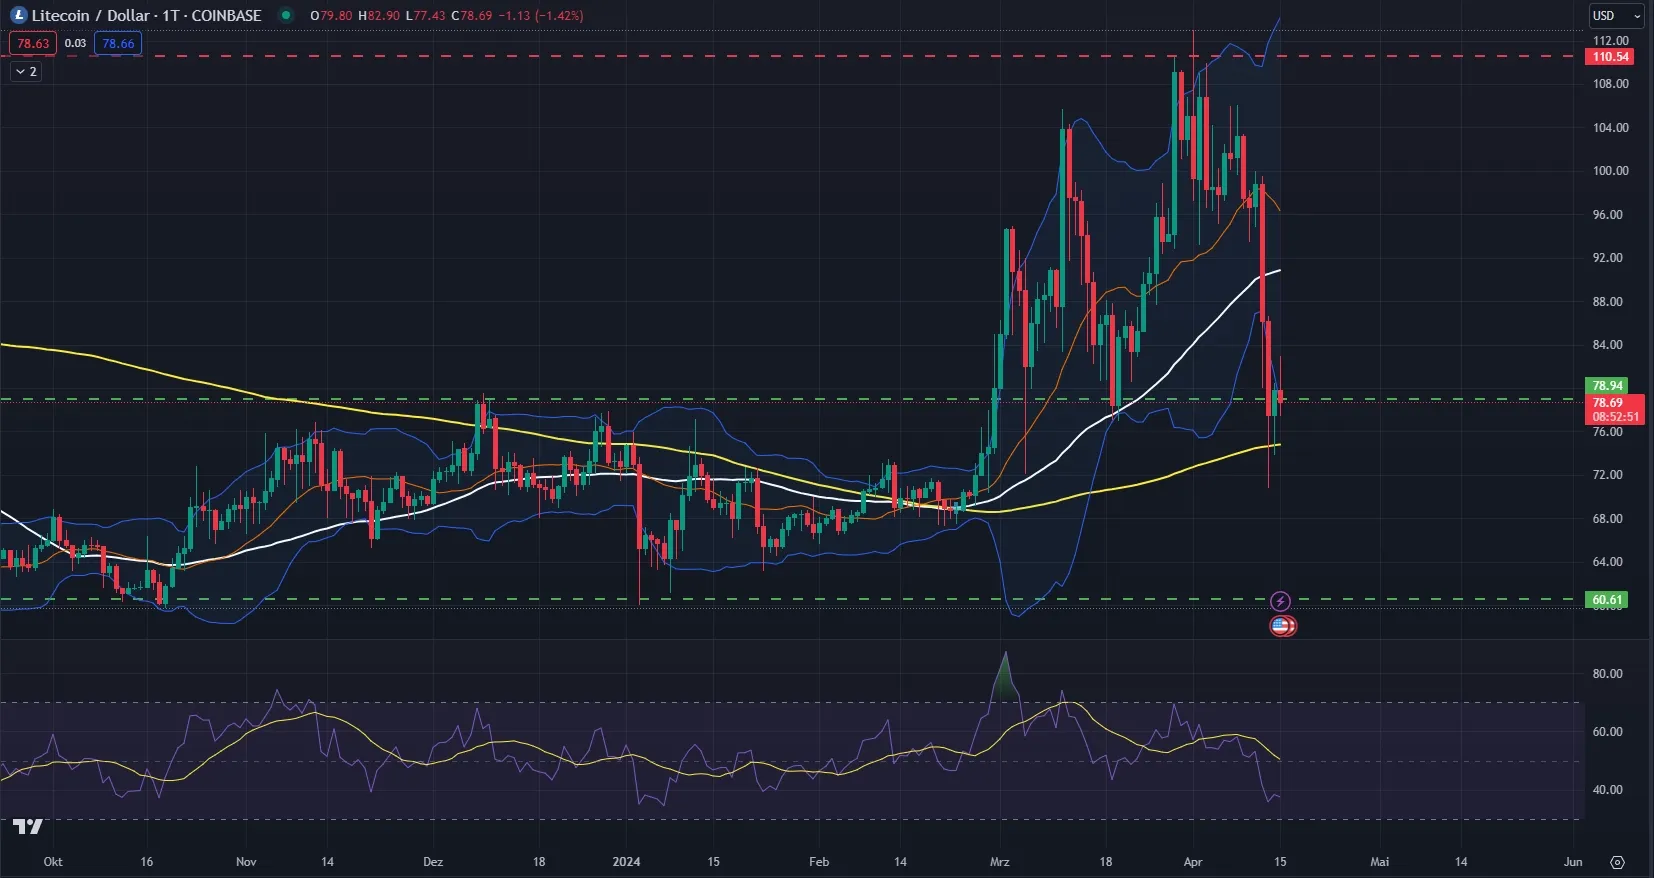 Litecoin (LTC) Kurs Chart in Tagesdarstellung (Stand: 15.04.2024)